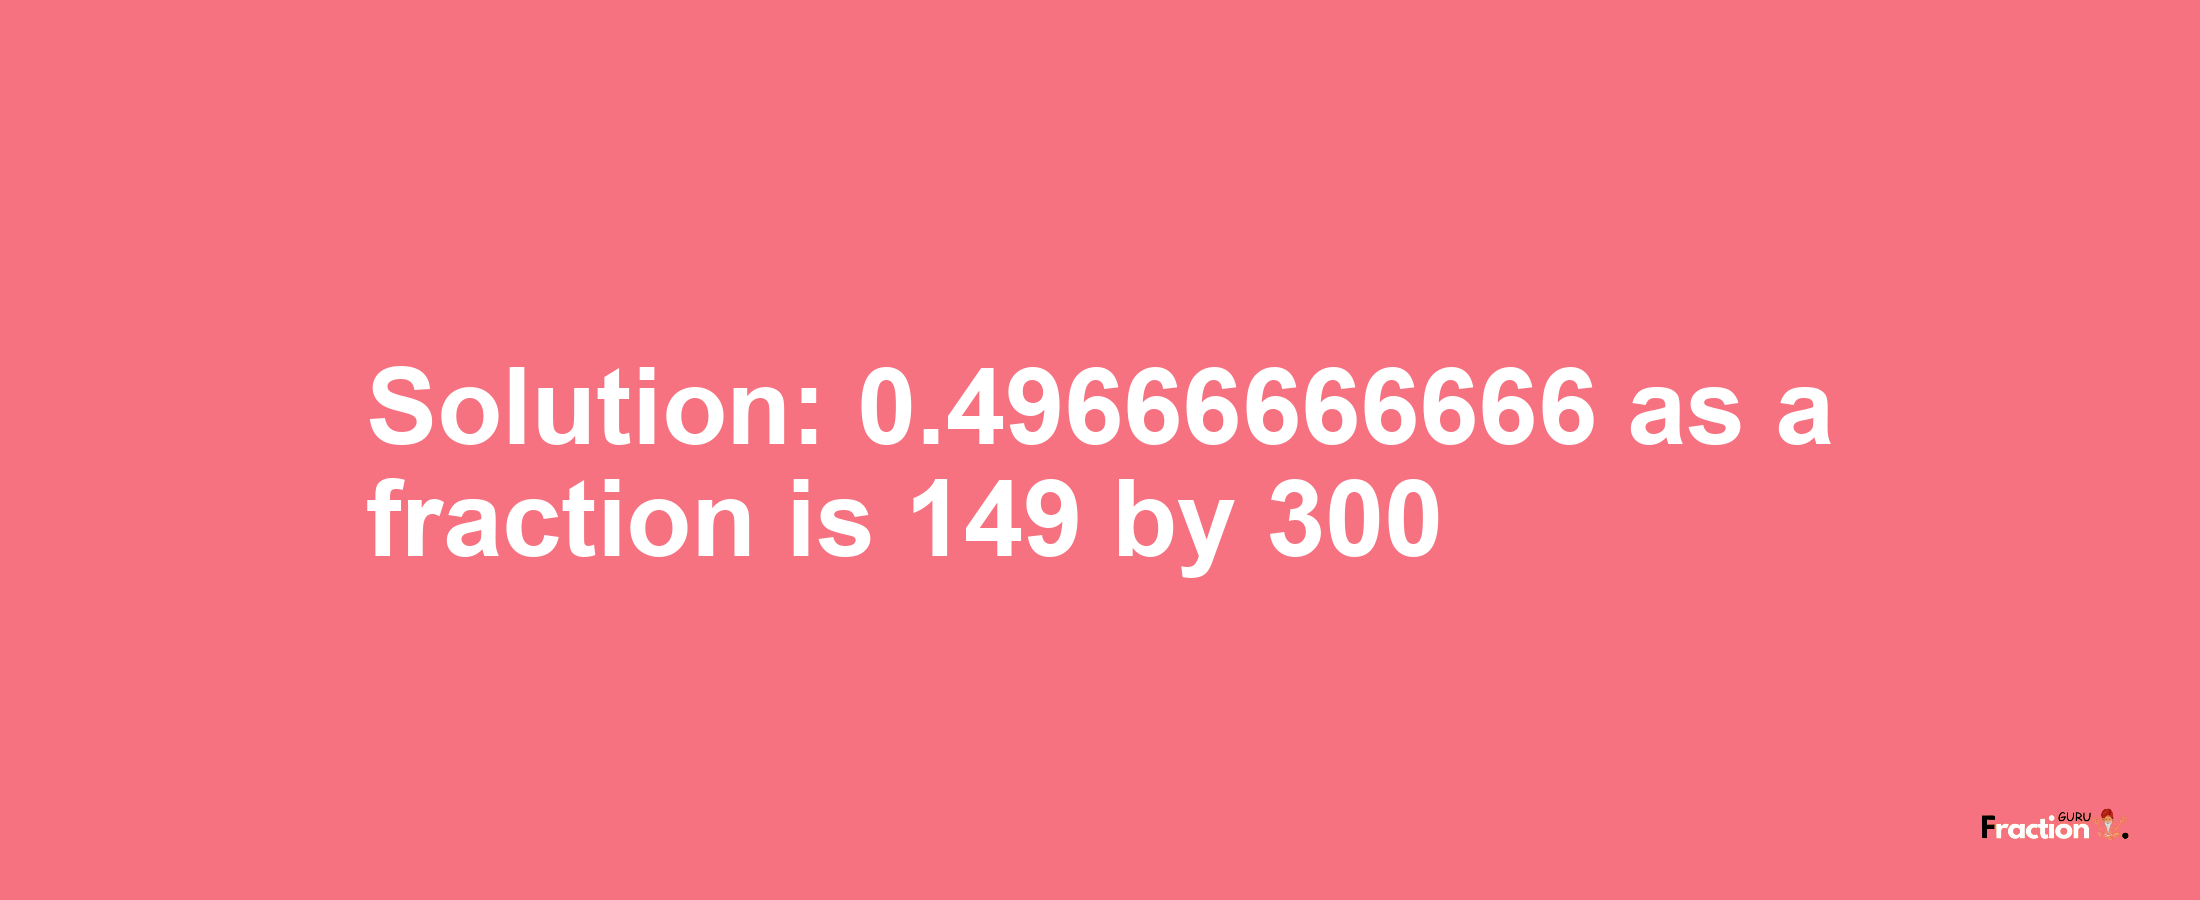 Solution:0.49666666666 as a fraction is 149/300